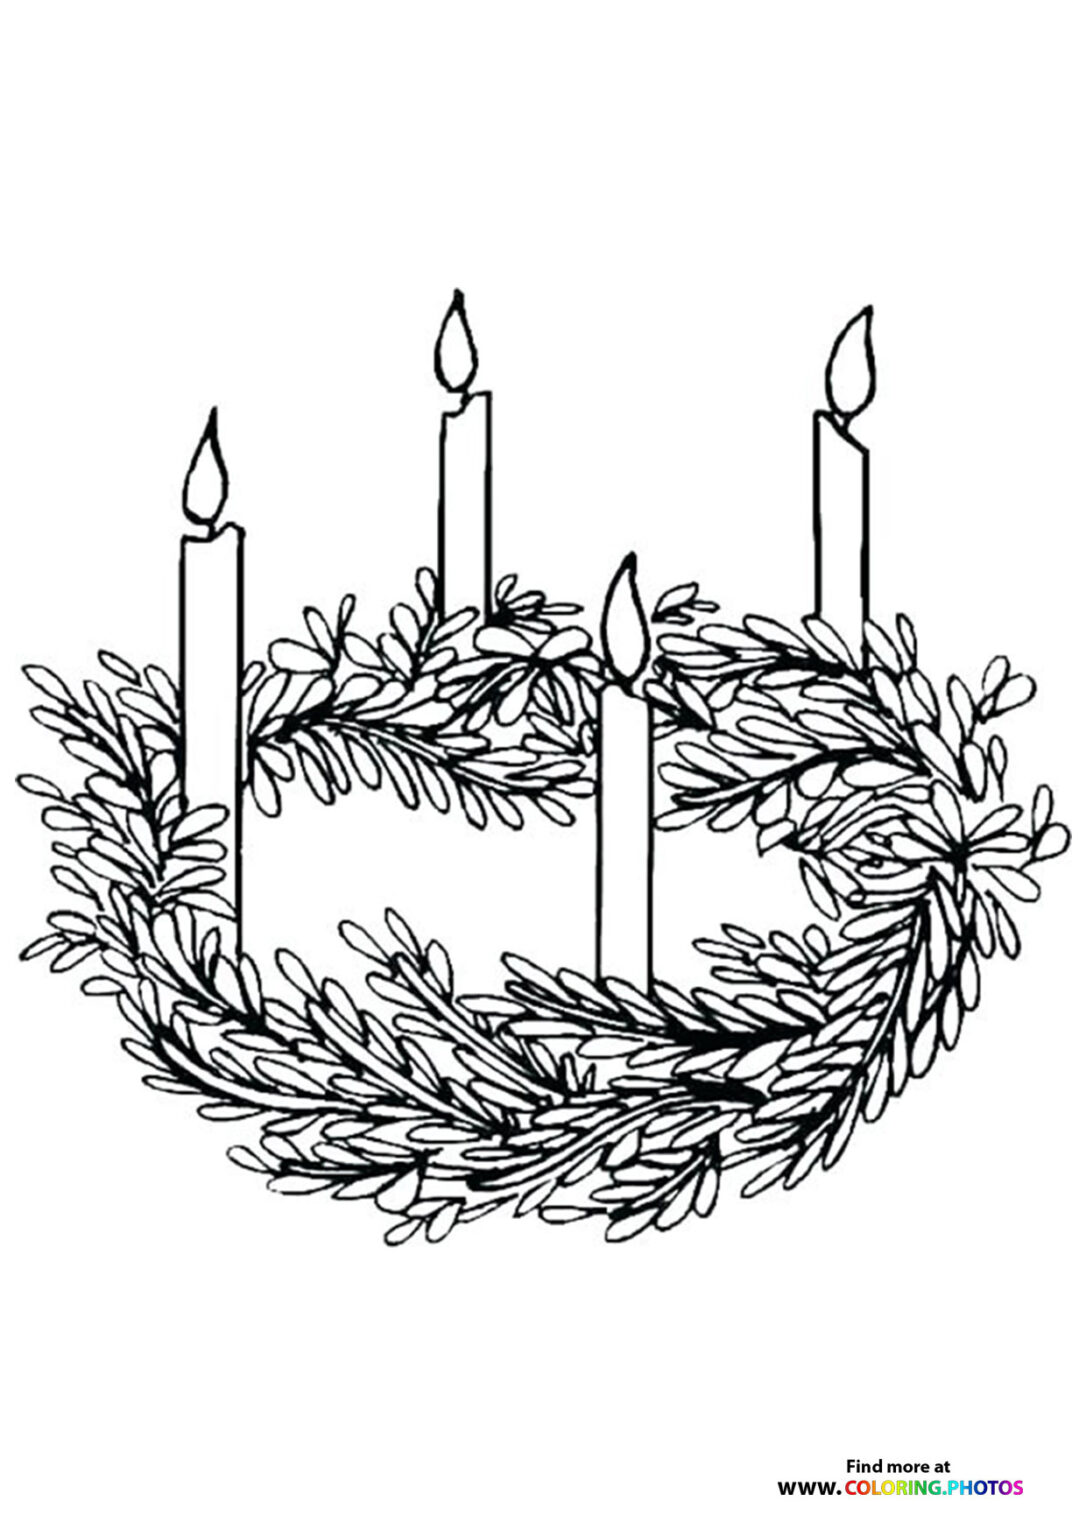 Catholic Advent Wreath Coloring Page